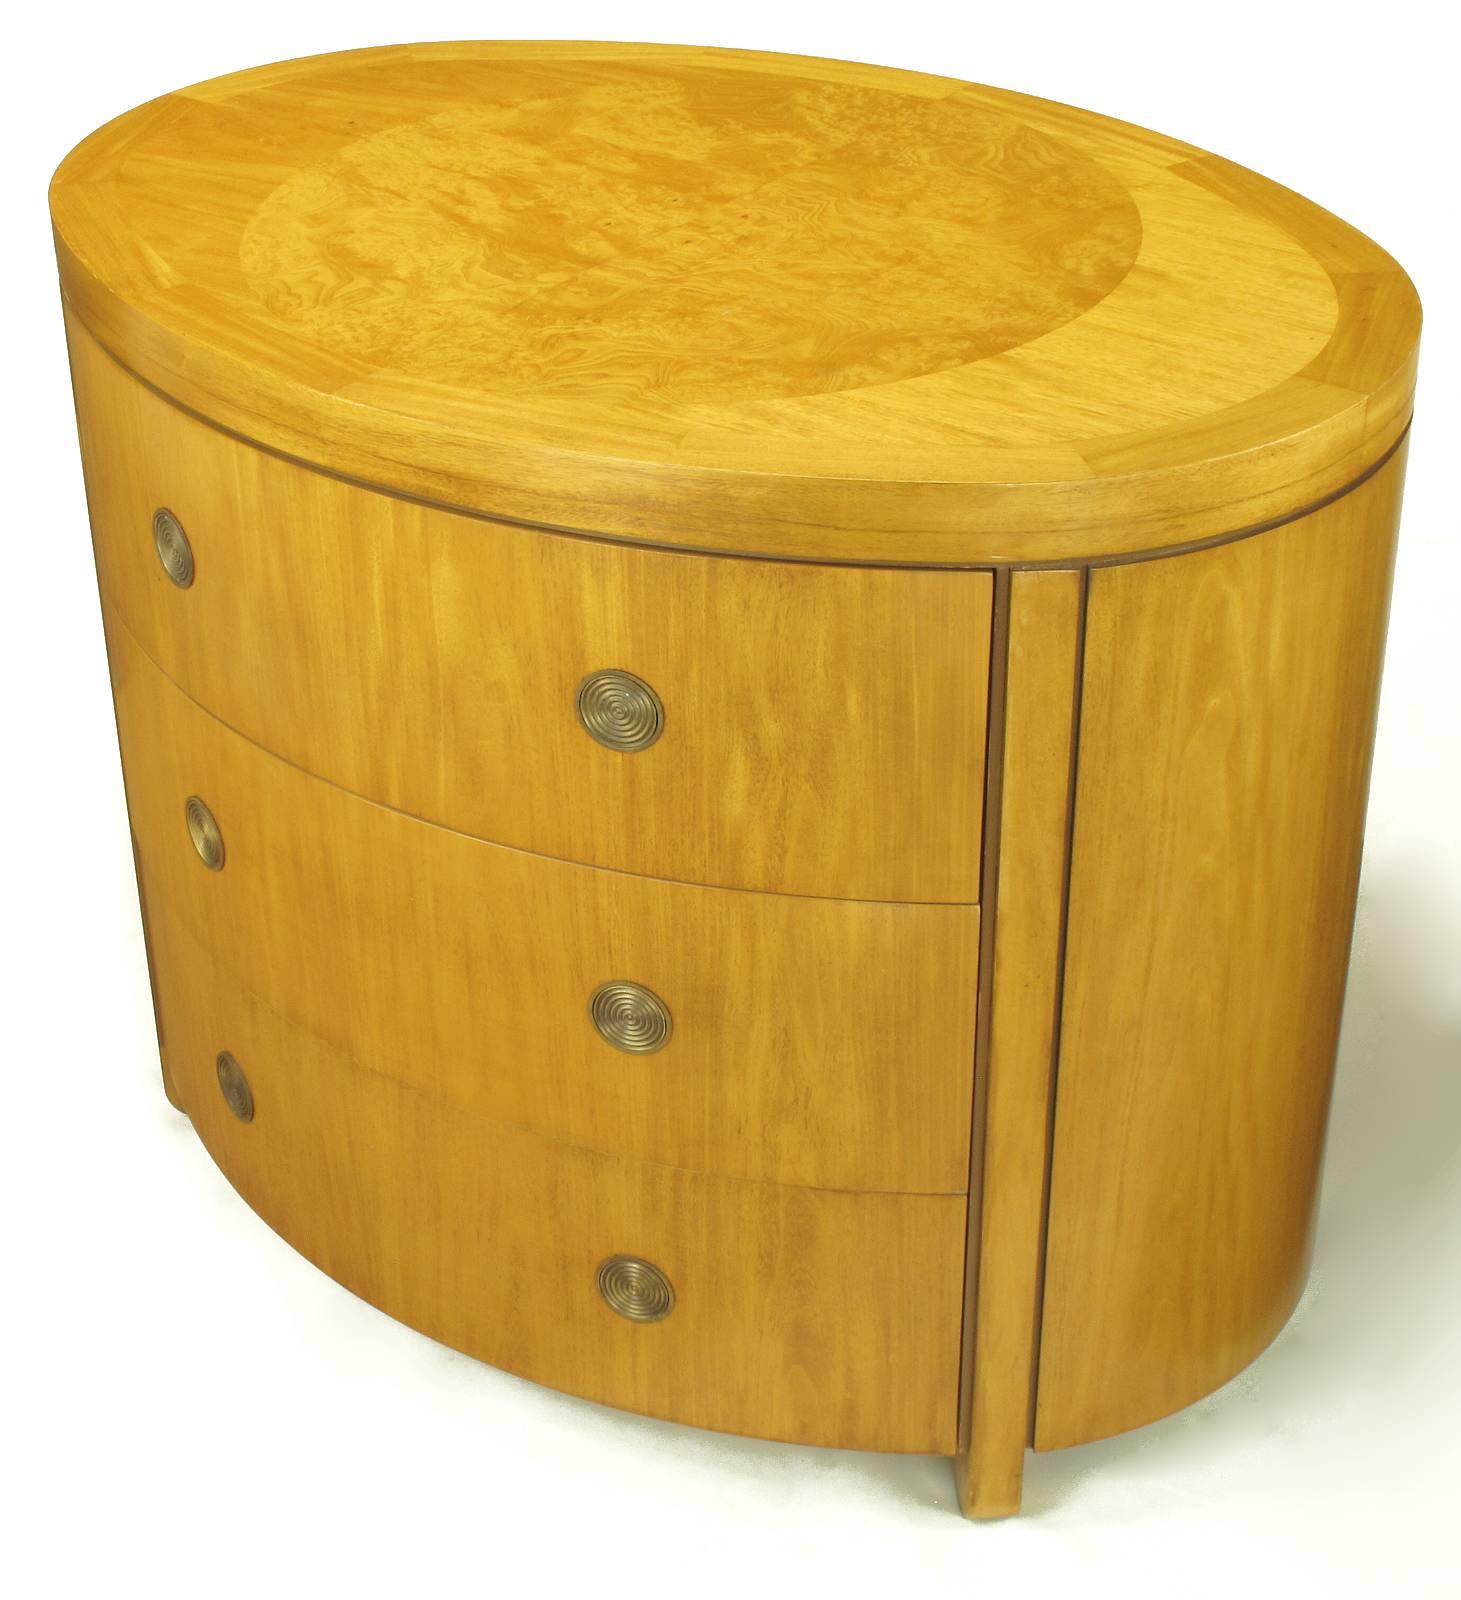 Charles Pfister for Baker Furniture oval three drawer commode. Prima vera mahogany case and drawer fronts with flush concentric circled swiveling brass pulls. Four radius end legs and olive ash burled parquetry top are set off from the case by